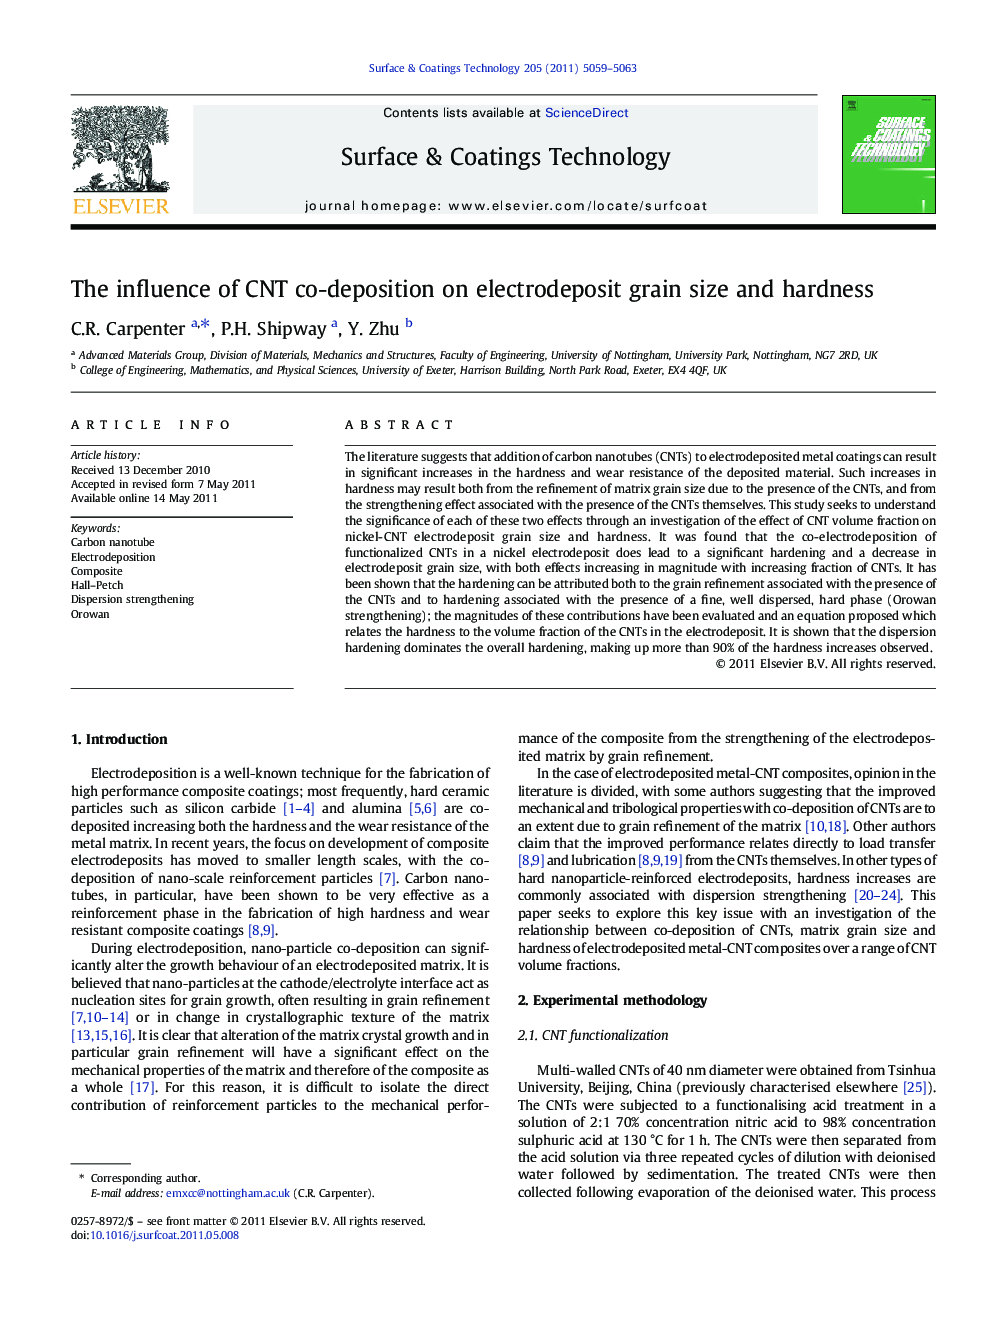 The influence of CNT co-deposition on electrodeposit grain size and hardness